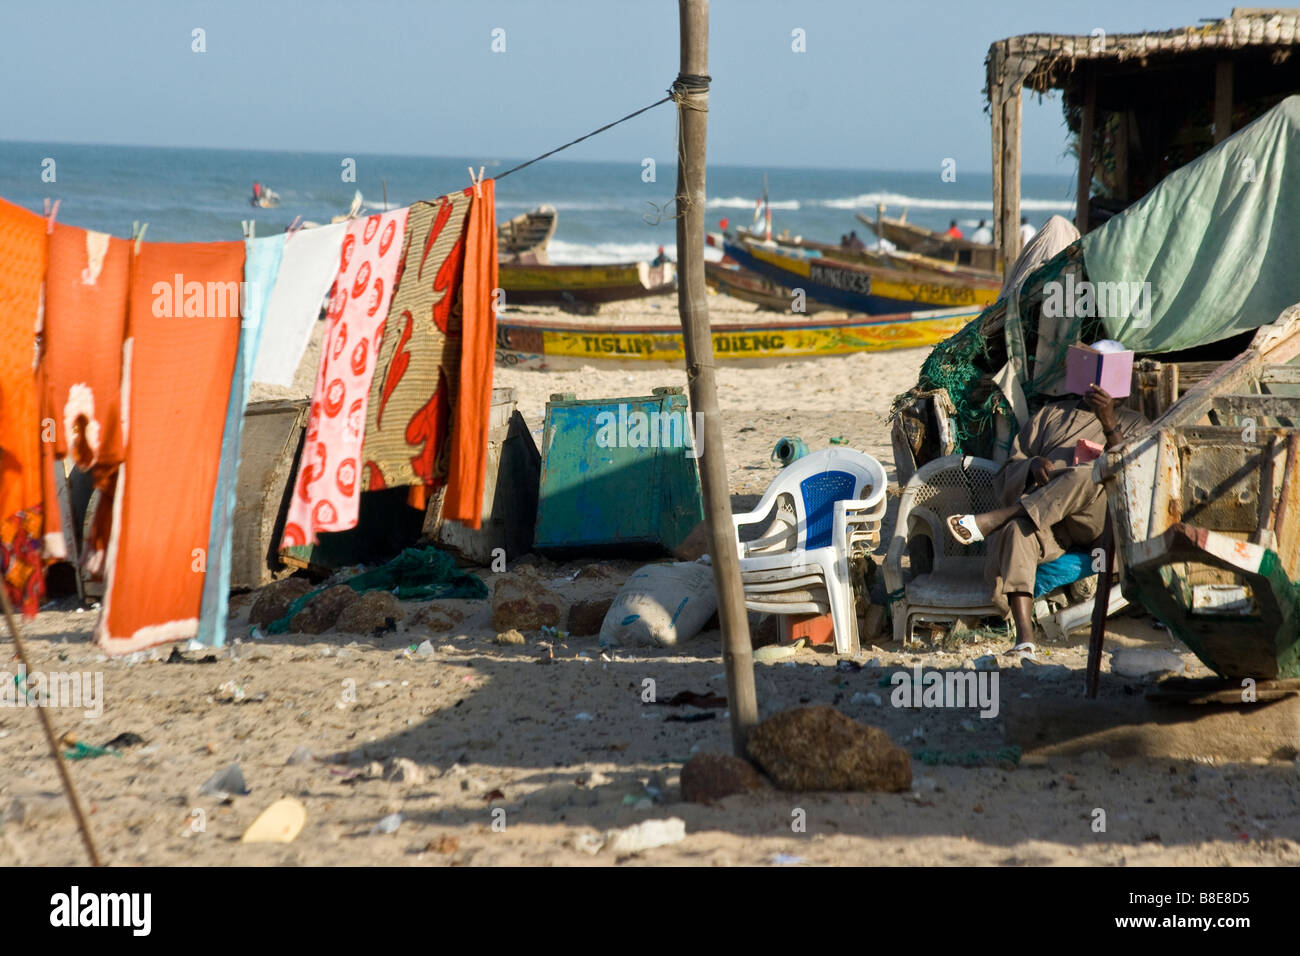 Muslim Man Reading on the Beach in St Louis in Senegal West Africa Stock Photo